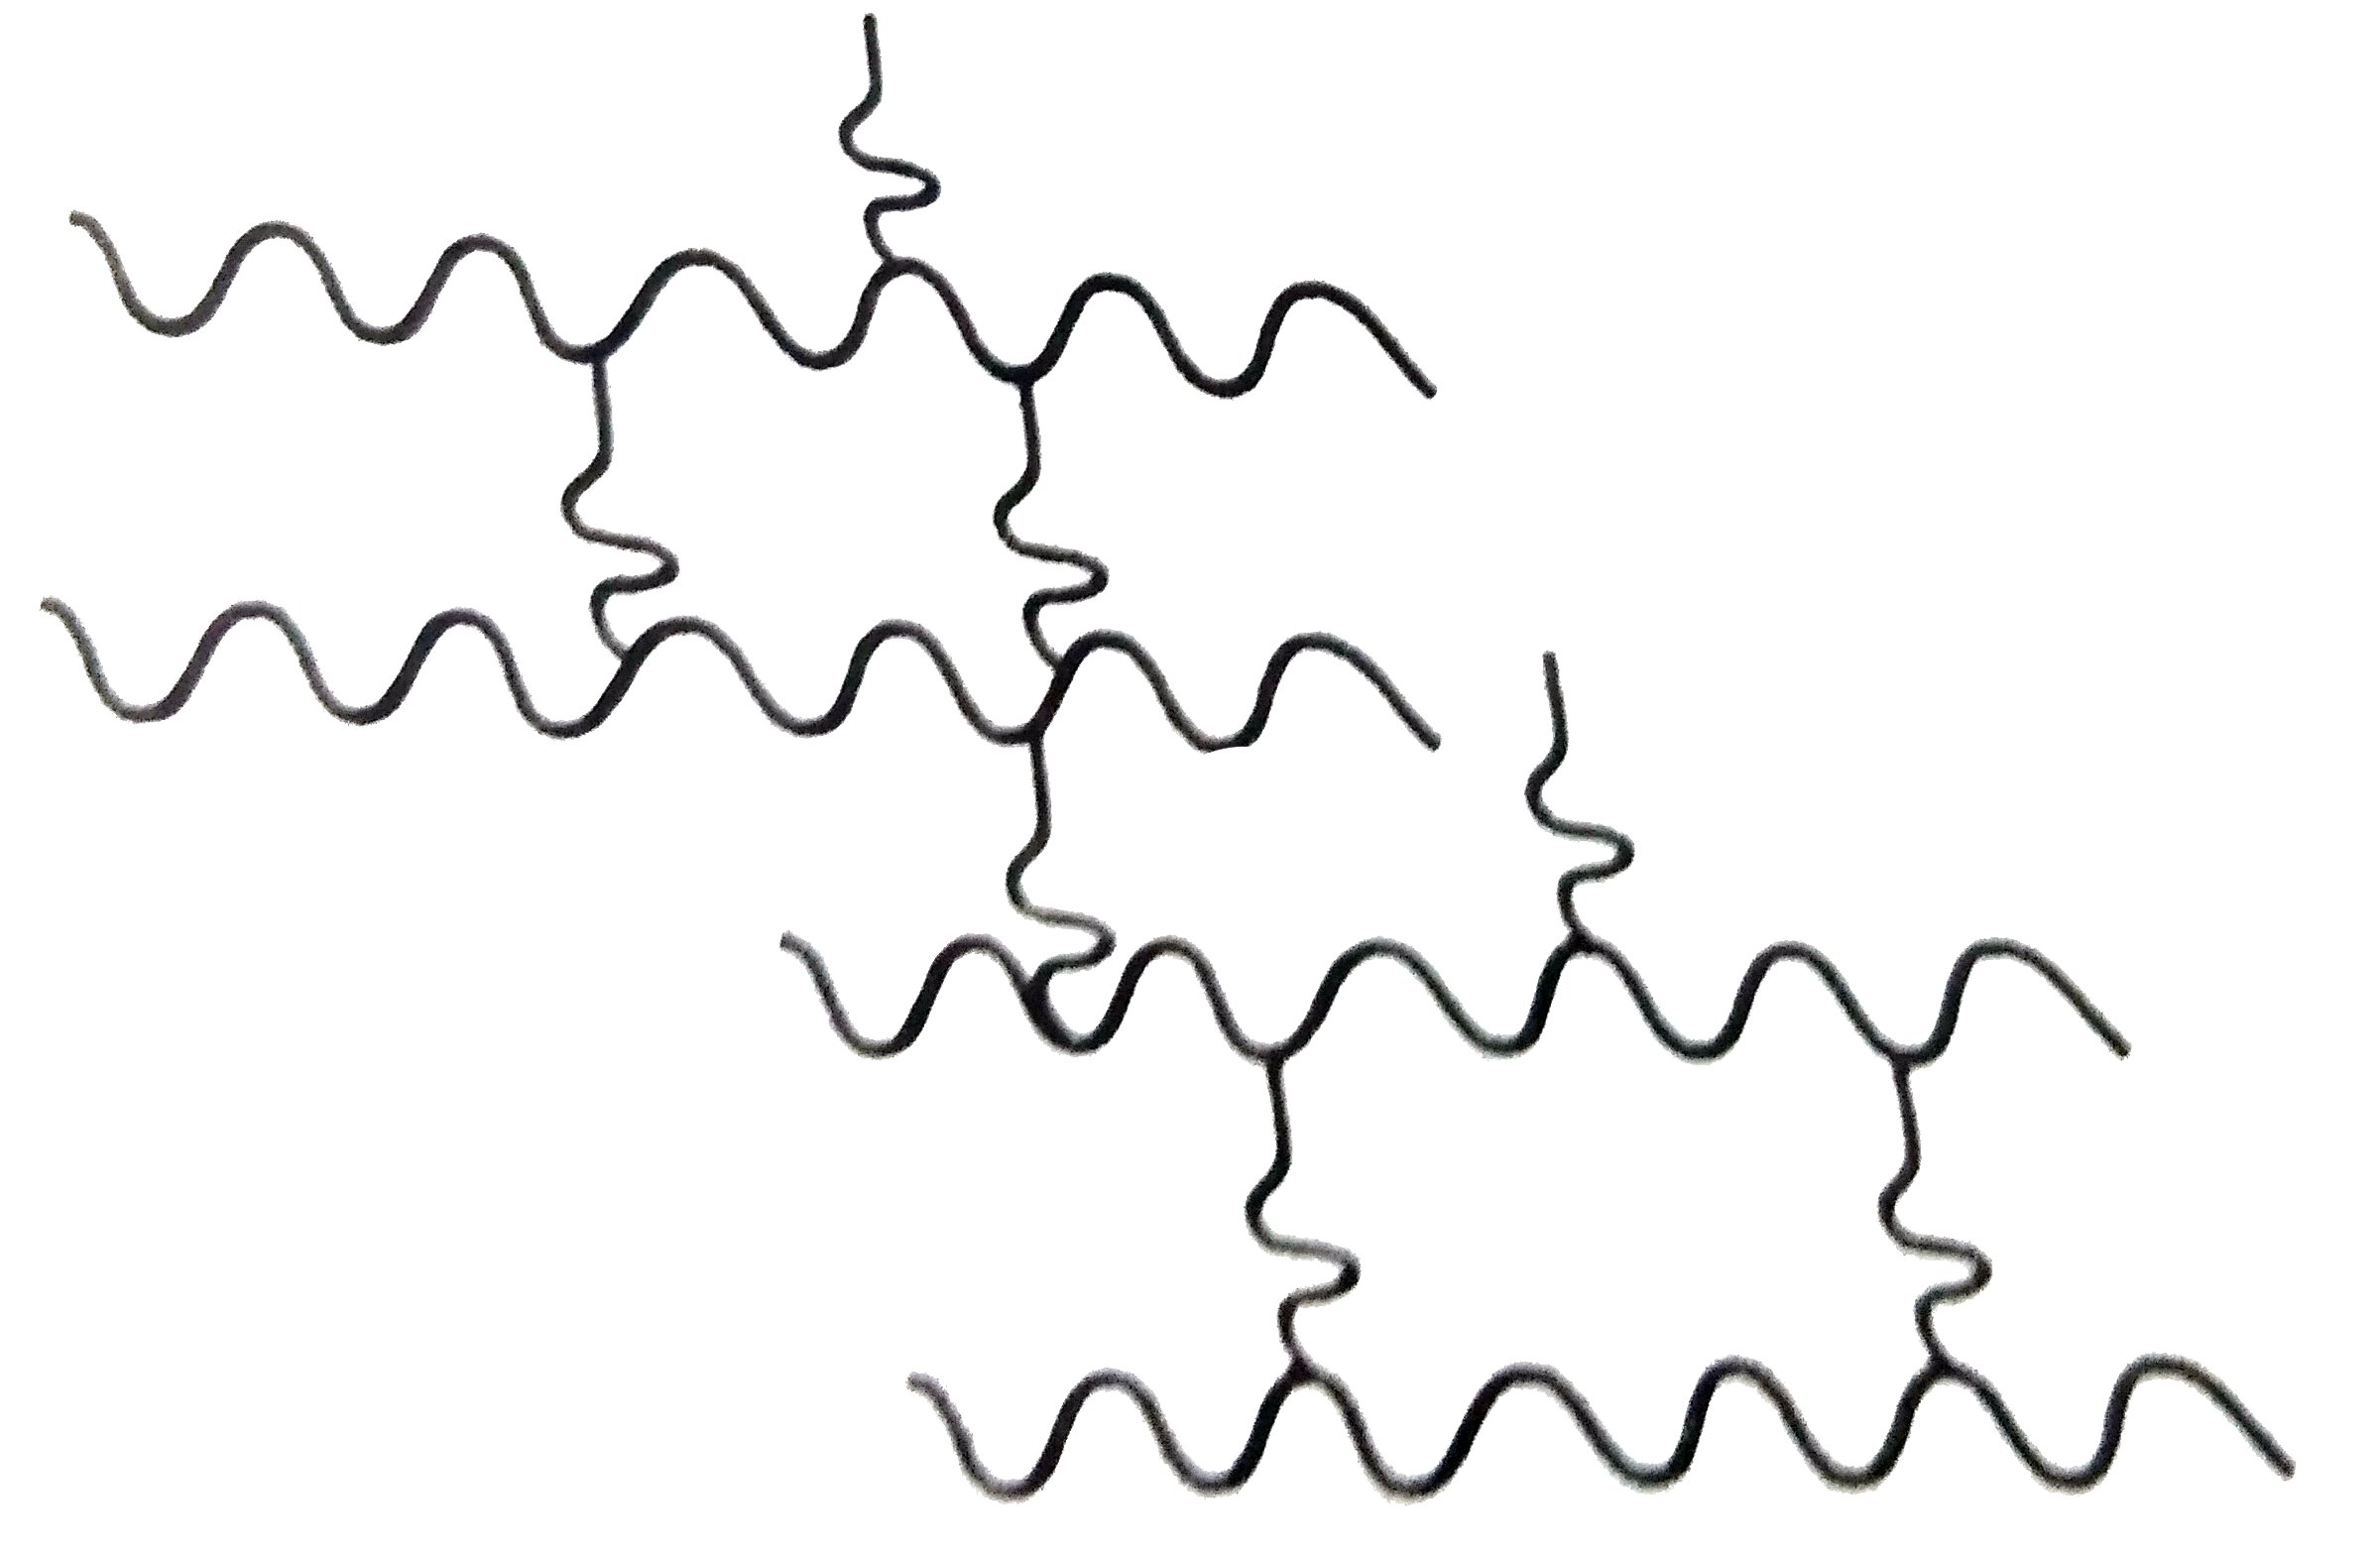 Identify the type of polymer given in the following figure.